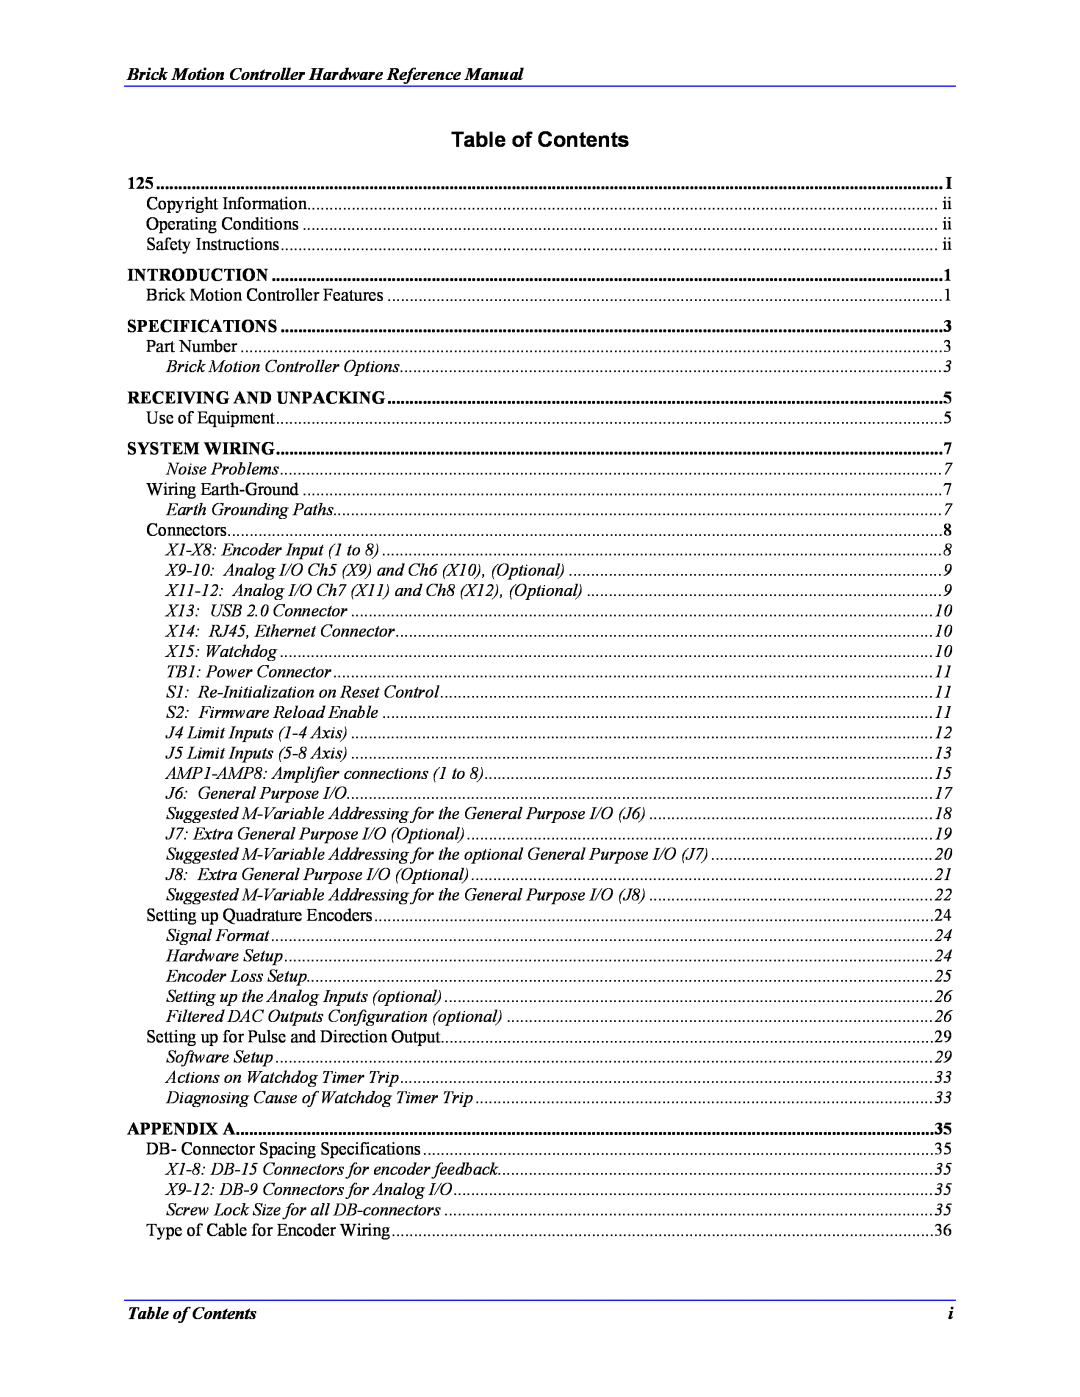 Delta Tau 5xx-603869-xUxx Table of Contents, Brick Motion Controller Hardware Reference Manual, Introduction, Appendix A 